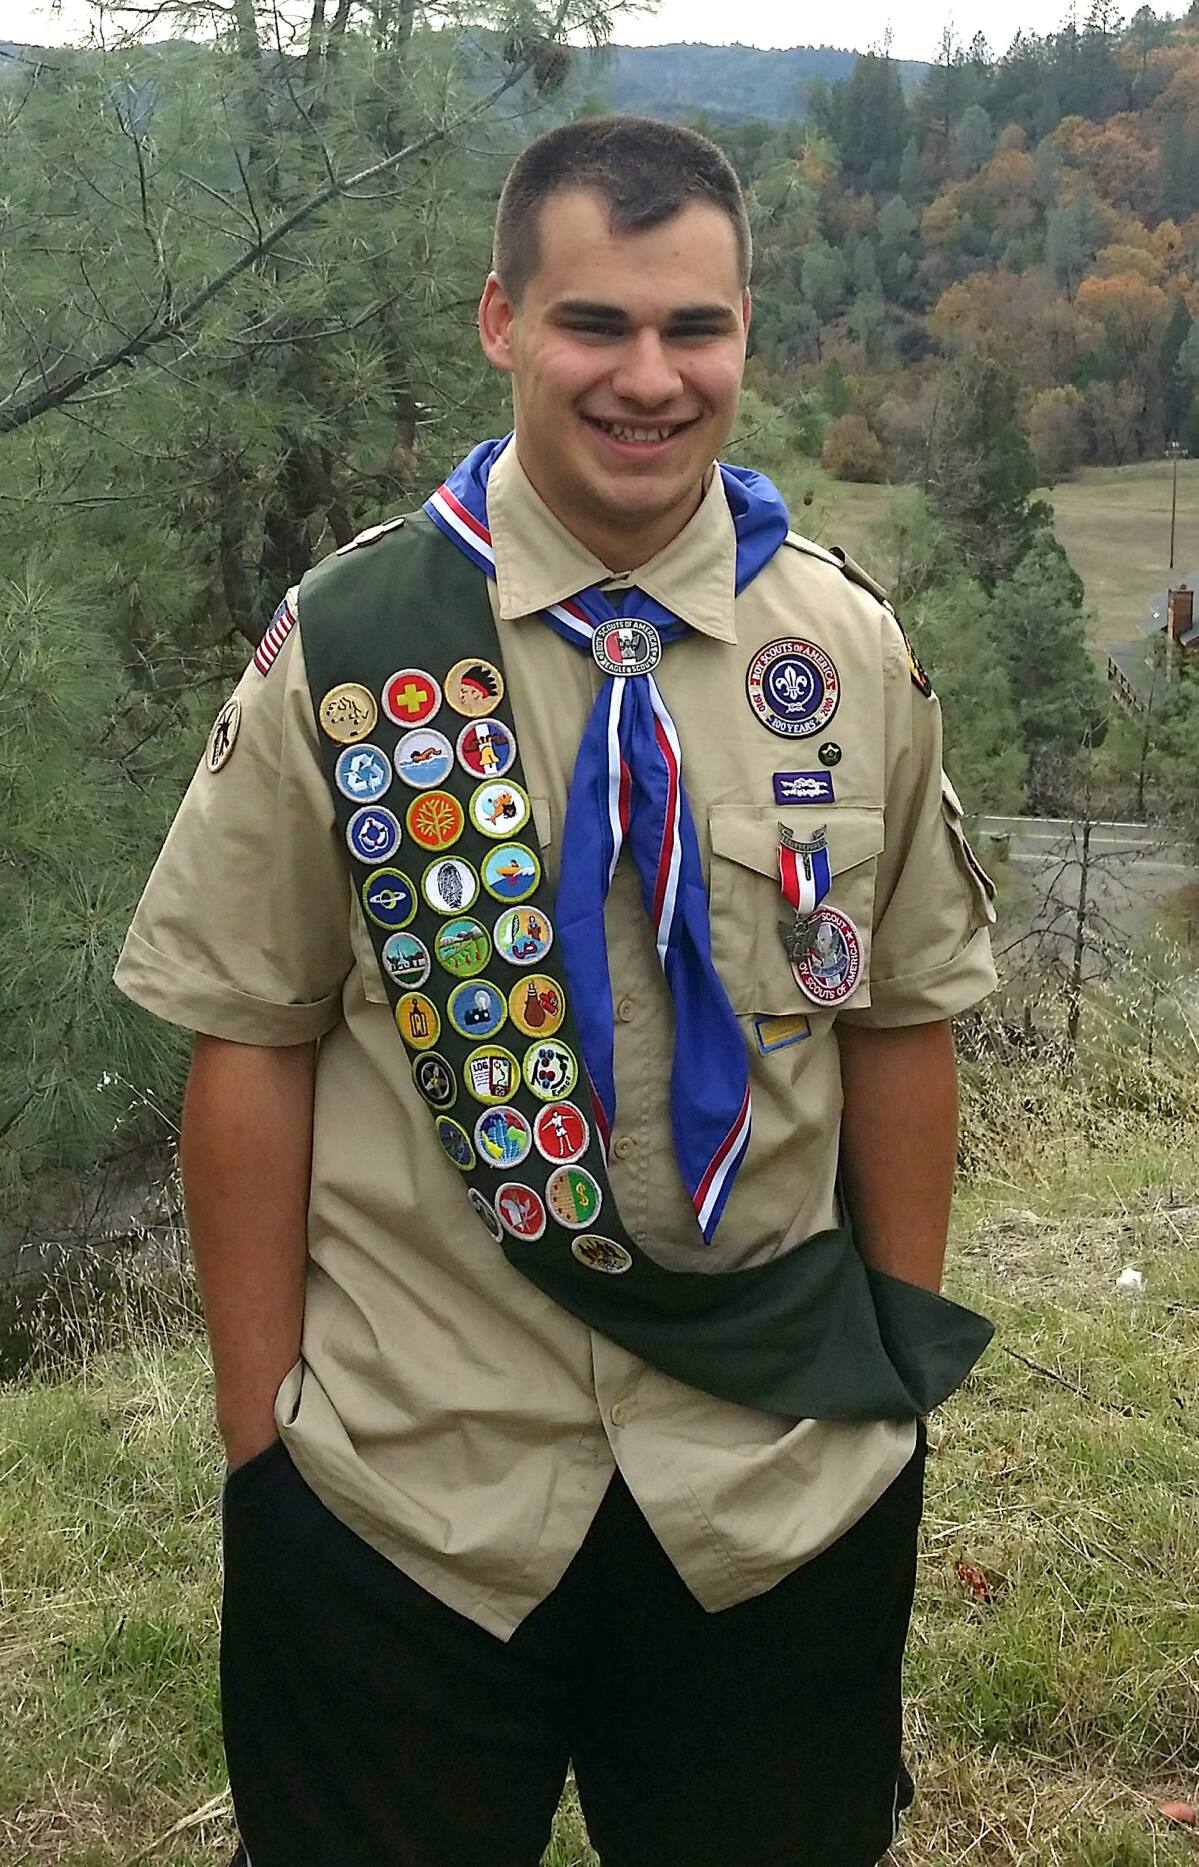 Youngster finds path to success through the Boy Scouts, Community News